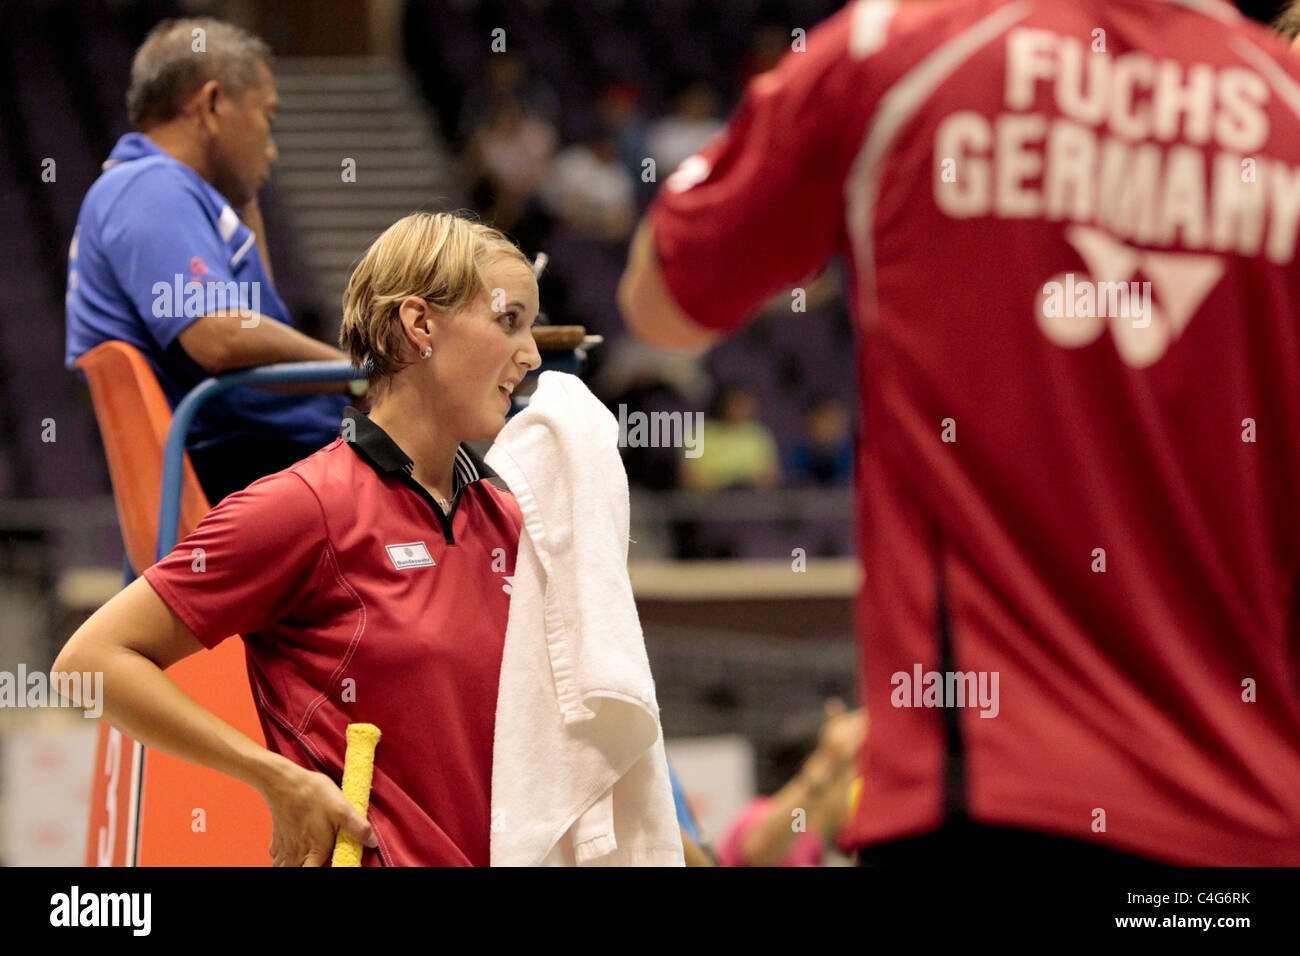 Birgit Michels(left) of Germany during the Mixed Doubles Round 1 of the Li-Ning Singapore Open 2011, Stock Photo